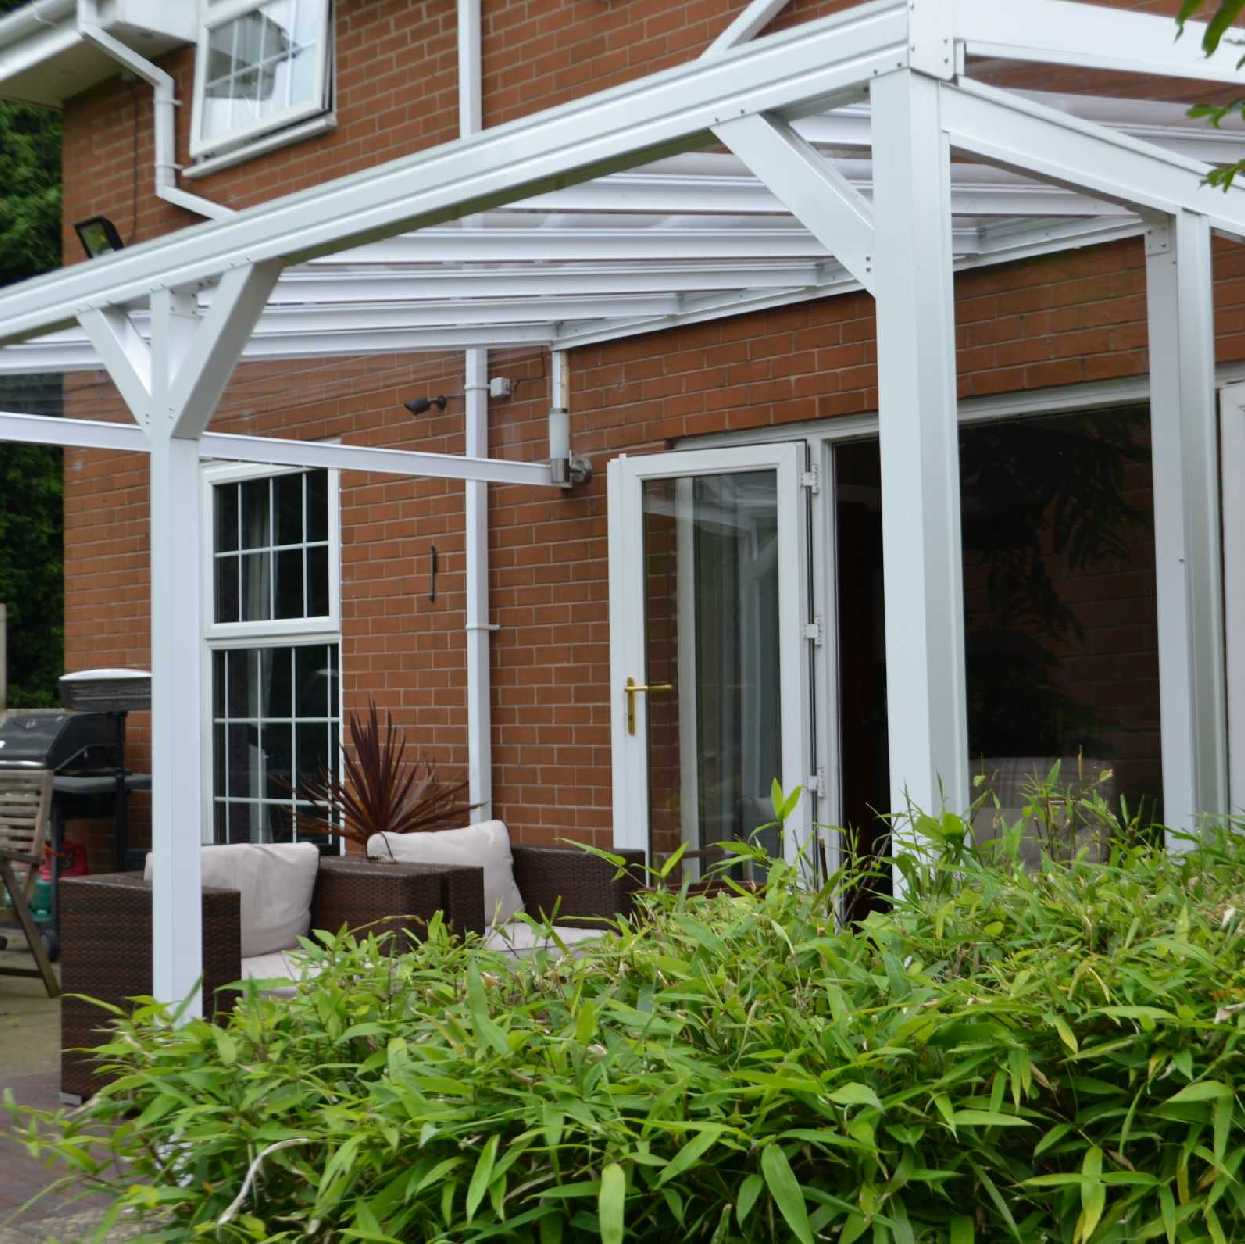 Omega Smart Lean-To Canopy, White with 6mm Glass Clear Plate Polycarbonate Glazing - 10.5m (W) x 3.5m (P), (5) Supporting Posts from Omega Build